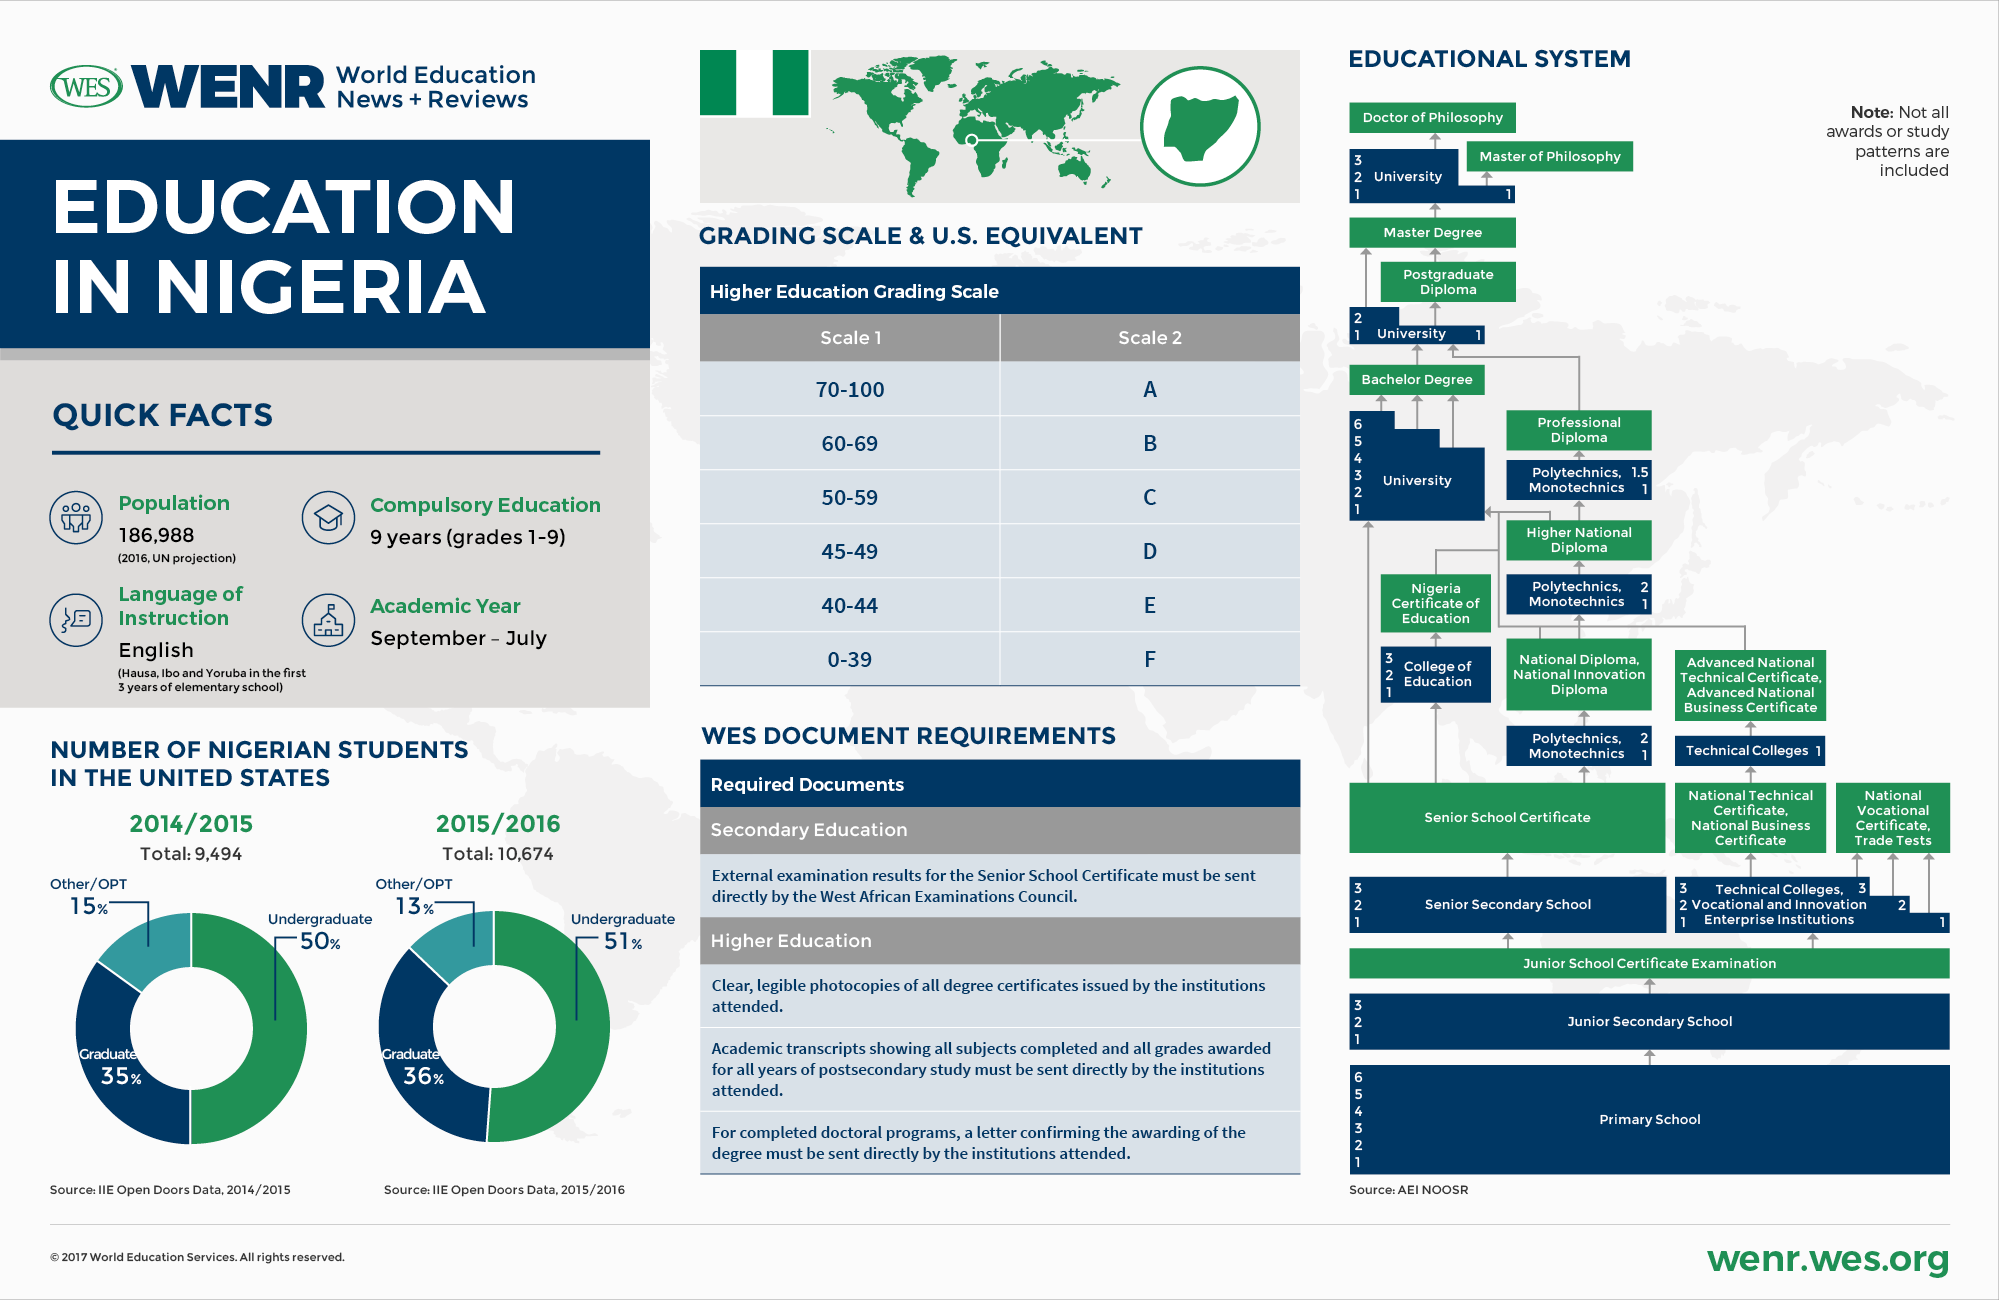 An infographic with fast facts about Nigeria's educational system and international student mobility landscape. 